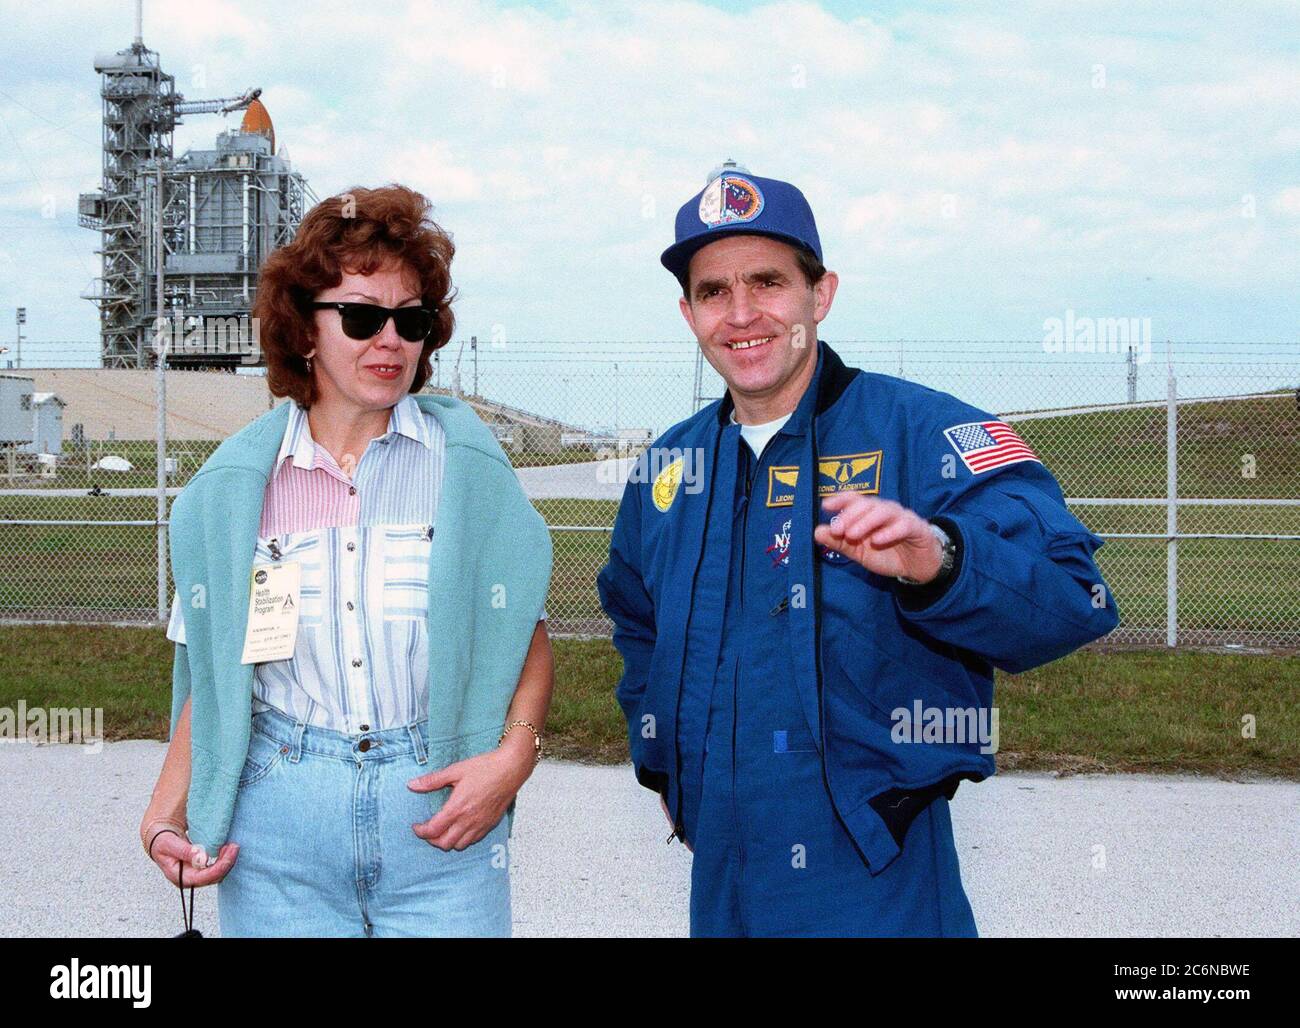 STS-87 Payload Specialist Leonid Kadenyuk of the National Space Agency of Ukraine poses with his wife, Vera Kadenyuk, in front of Kennedy Space Center's Launch Pad 39B during final prelaunch activities leading up to the scheduled Nov. 19 liftoff. The other STS-87 crew members are Commander Kevin Kregel; Pilot Steven Lindsey; and Mission Specialists Kalpana Chawla, Ph.D.; Winston Scott; and Takao Doi, Ph.D., National Space Development Agency of Japan. STS-87 will be the fourth flight of the United States Microgravity Payload and the Spartan-201 deployable satellite Stock Photo